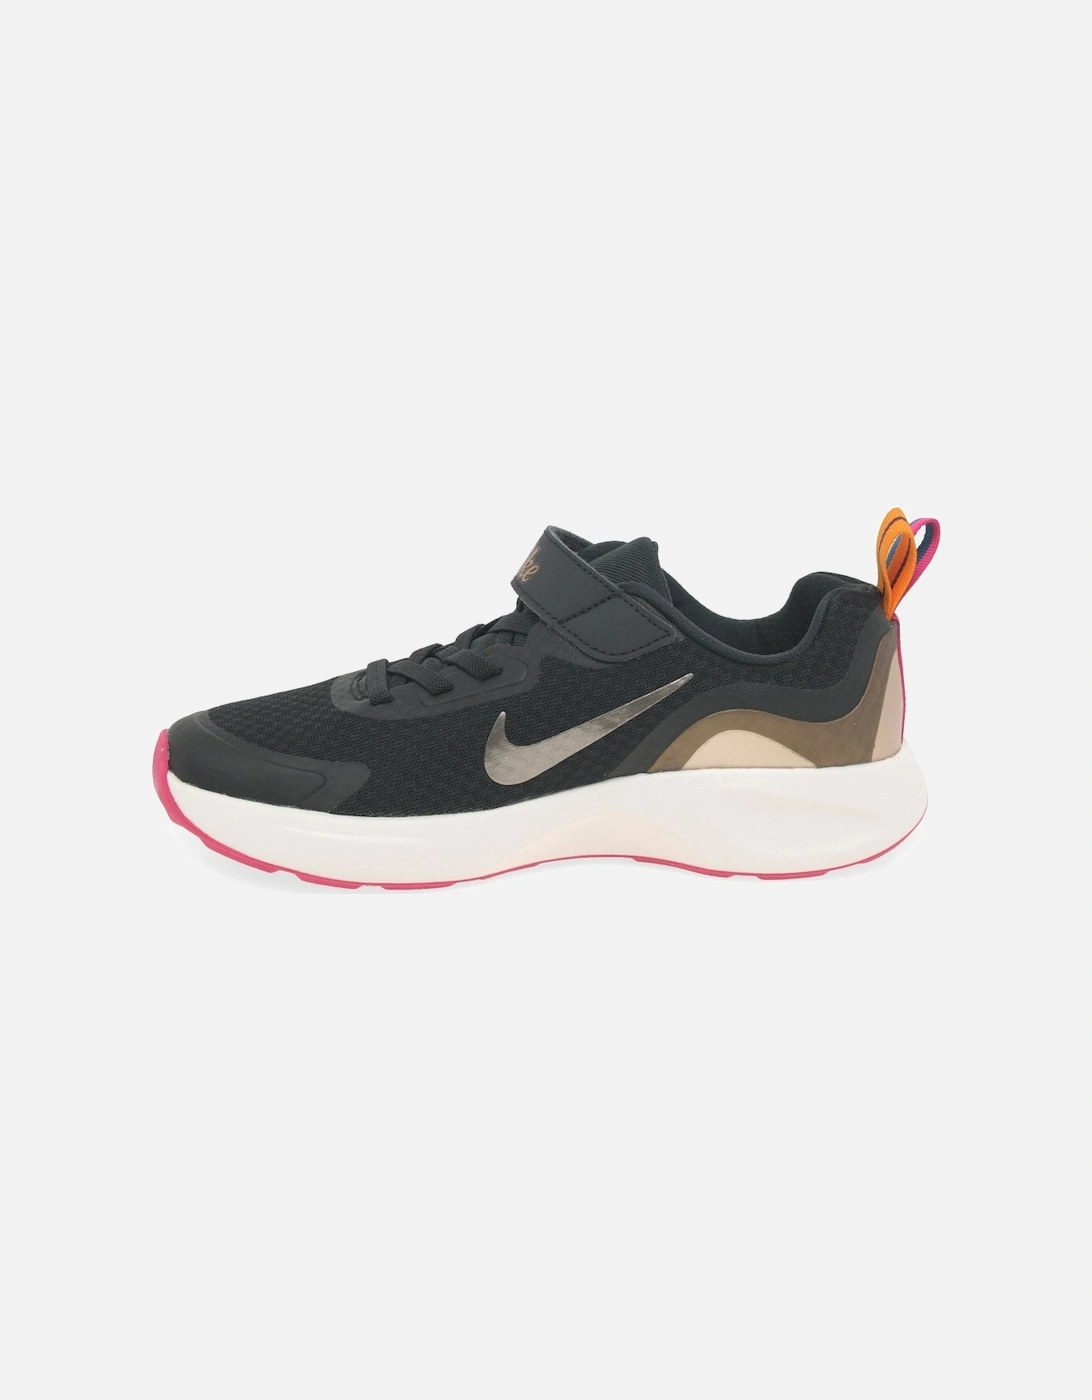 Wearallday Prem Girls Youth Sports Trainers